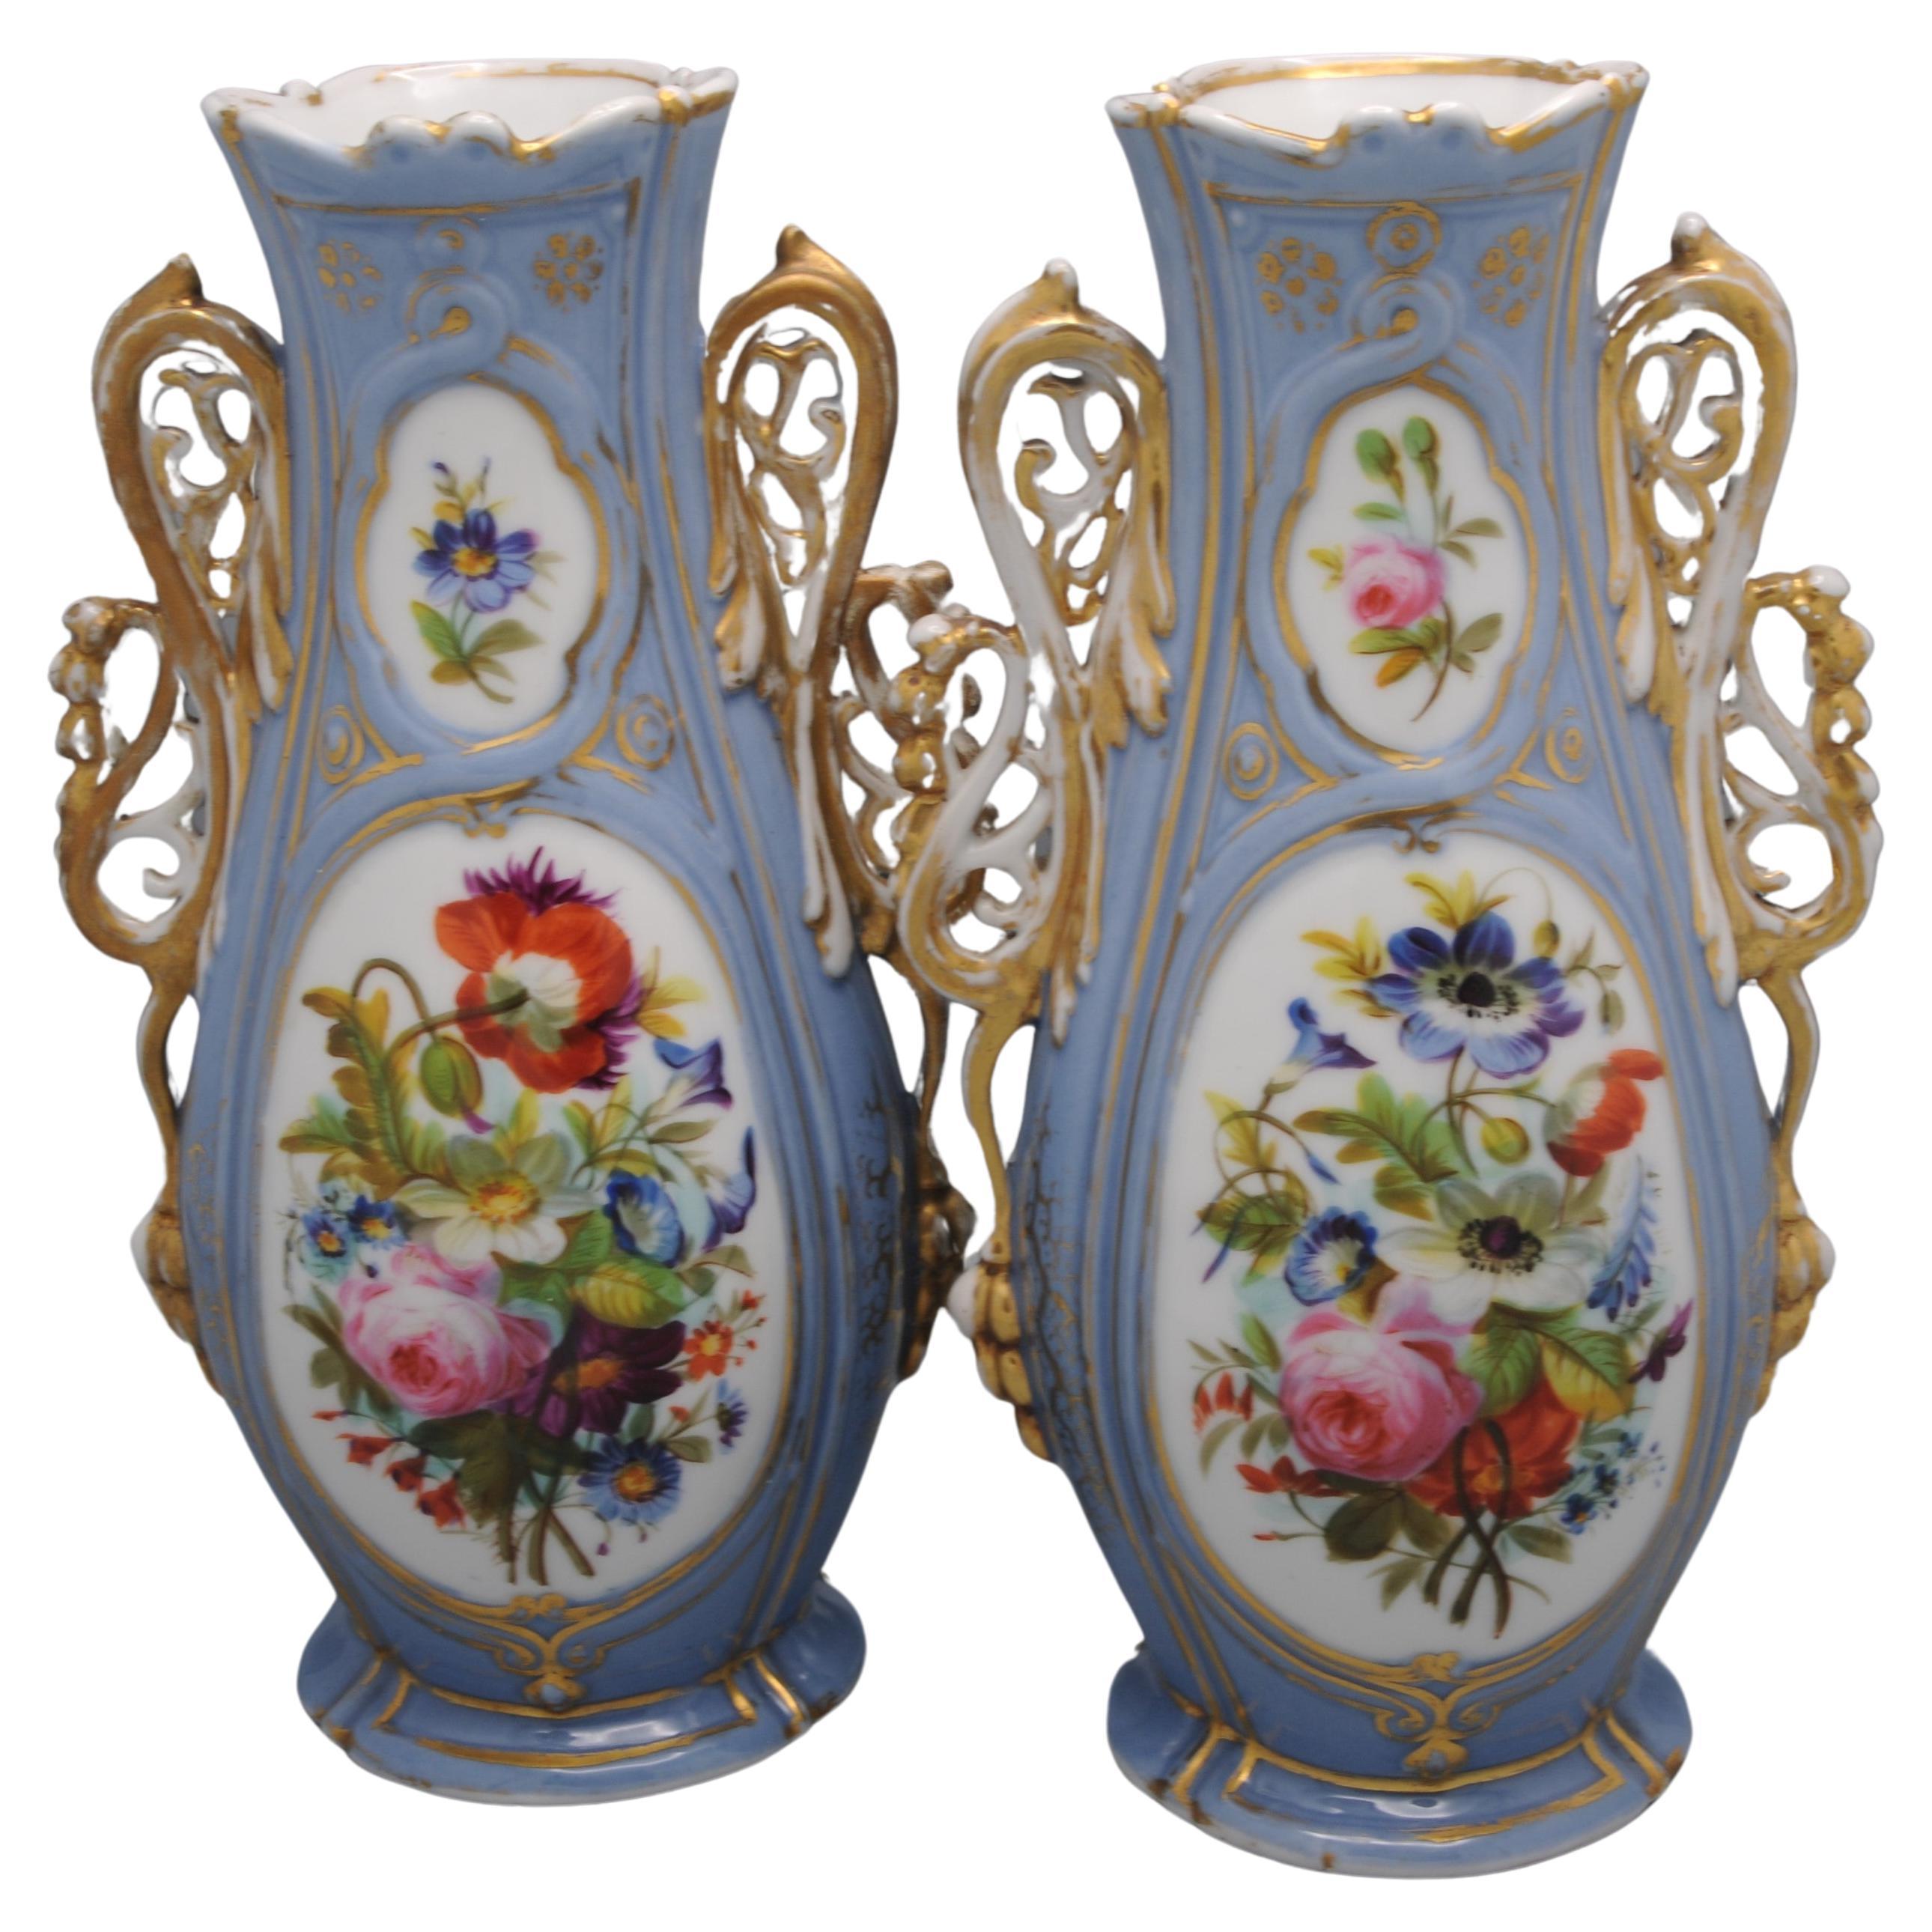 Very ornate pair of Vieux Paris or Vieux Bruxelles romantic vases, second half 19th century
Baluster form, heavy porcelain vases decorated with flowers and floral sprays on a lilac font. Outward scroll handles. The sides and back decorated with gilt